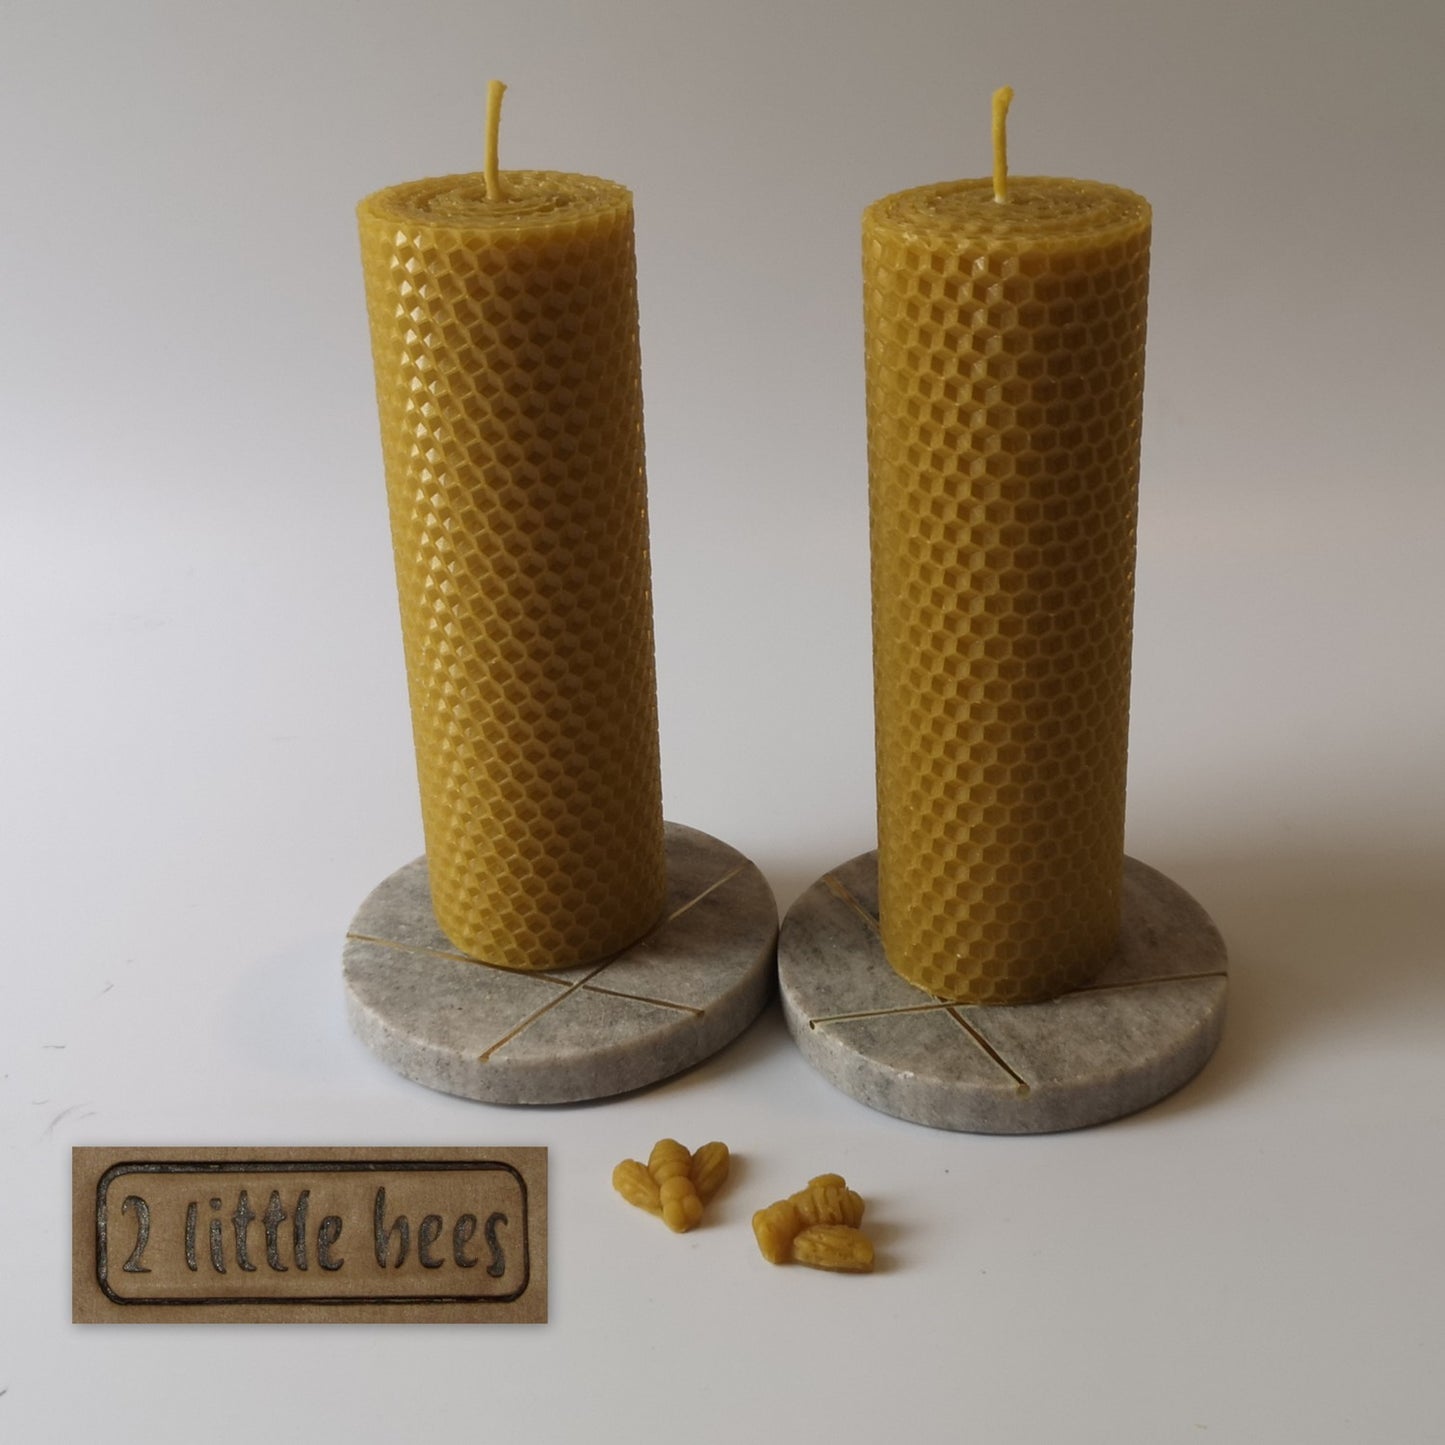 Beeswax candle. Natural product. Stone holders.